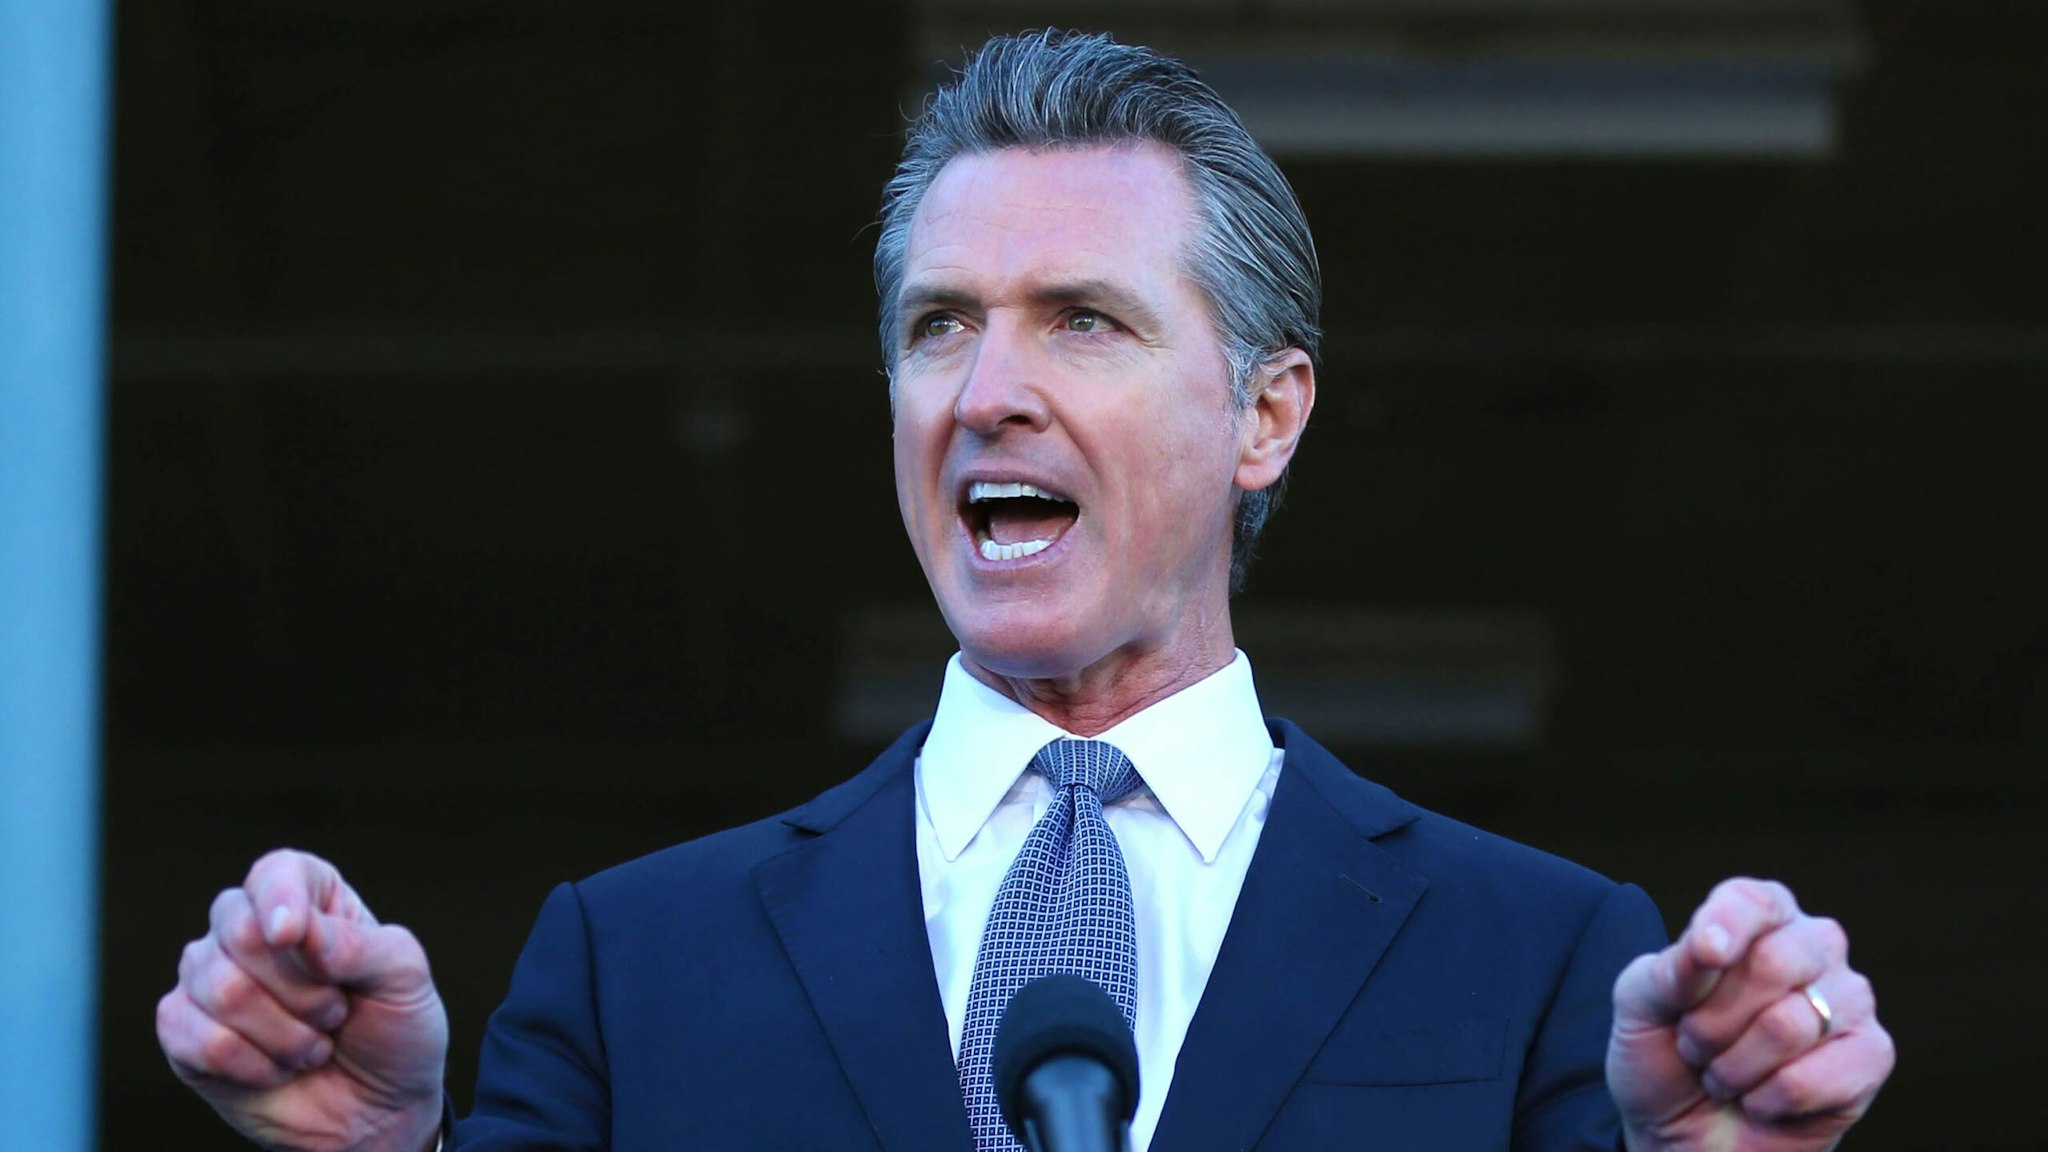 DUBLIN, CA - DECEMBER 17: California Governor Gavin Newsom introduces new state efforts and proposed investments to fight and prevent crime across the state during a news conference in Dublin, Calif., on Friday, Dec. 17, 2021. Newsom was joined by Attorney General Rob Bonta, and other law enforcement leaders.